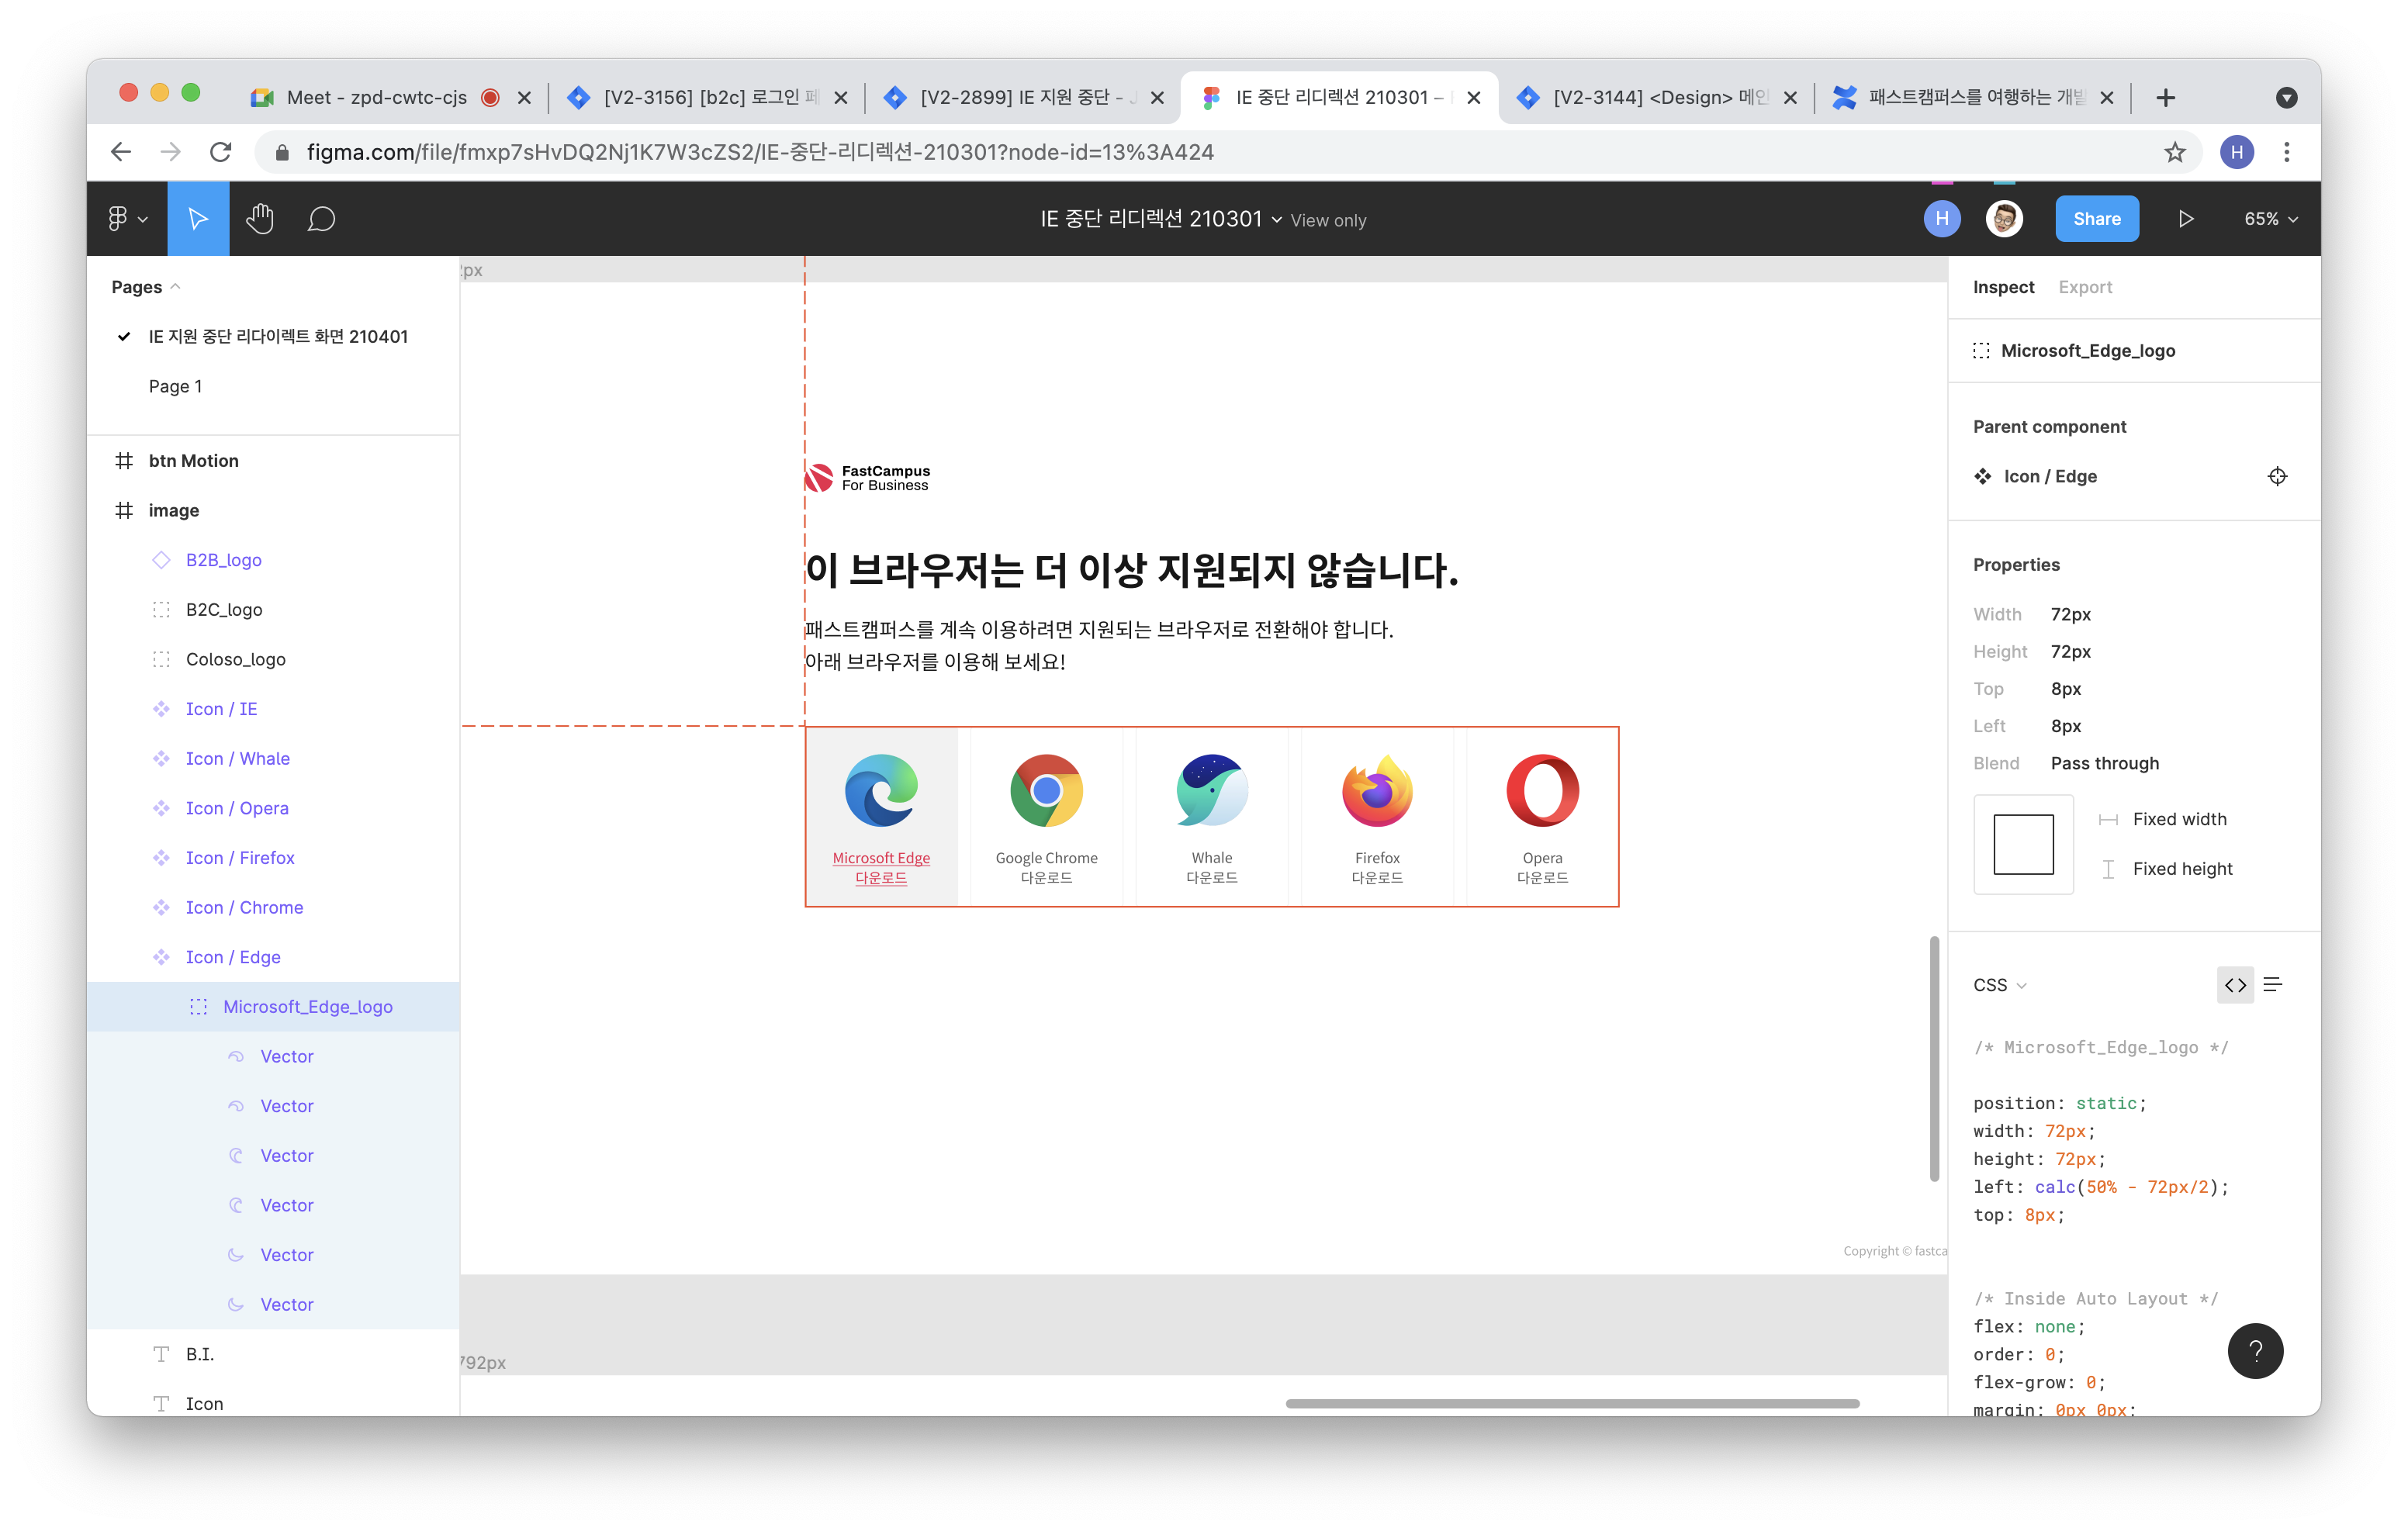 Web browser recommendation page in Figma